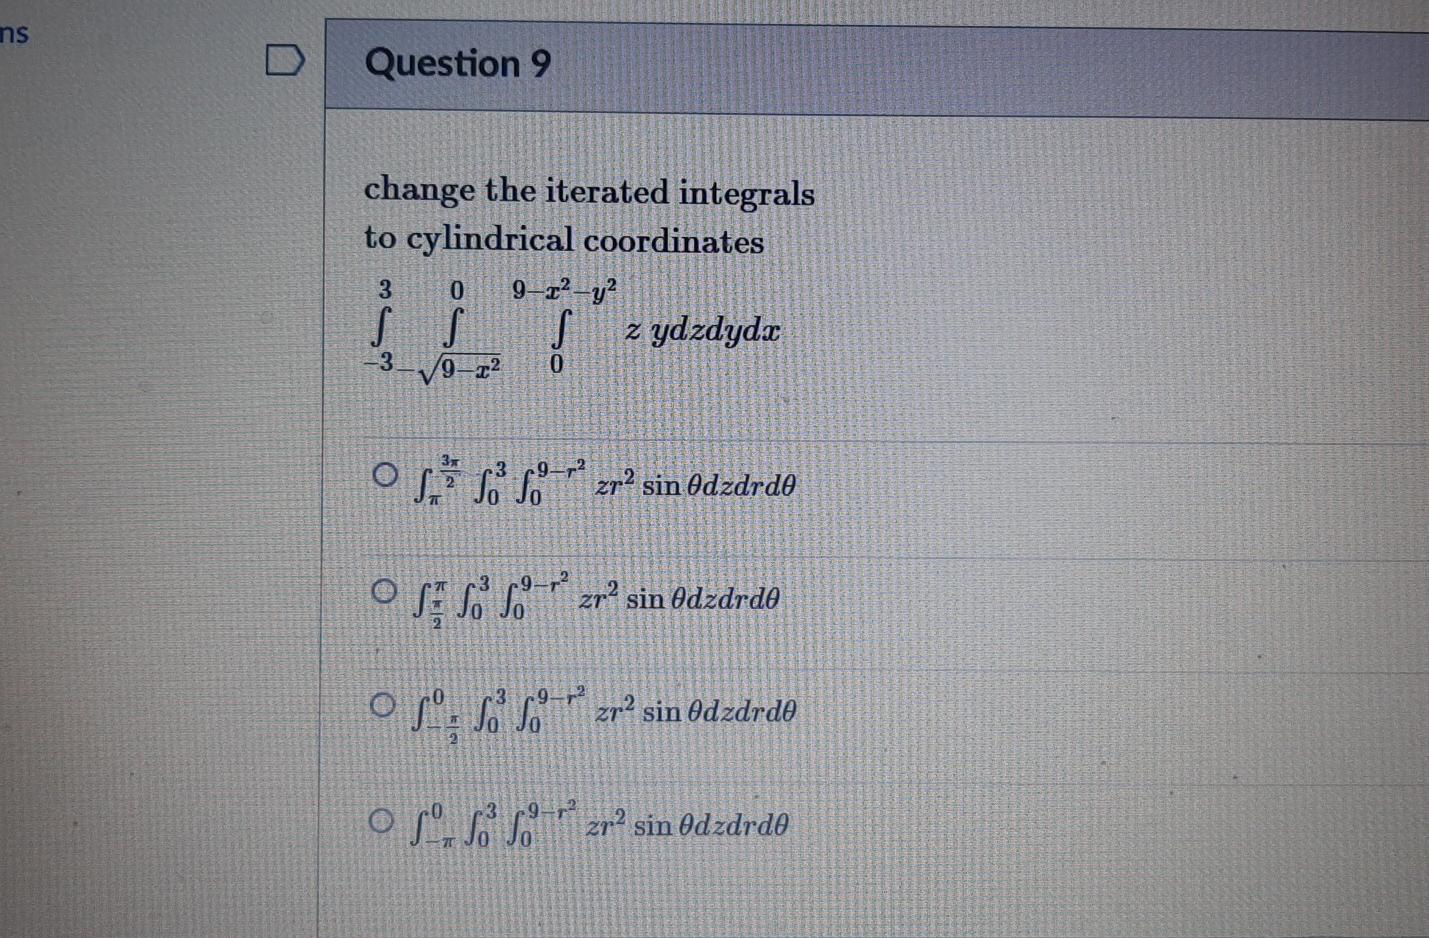 Ns Question 9 Change The Iterated Integrals To Cylindrical Coordinates 9 22 Y2 Z Ydzdyd 3 0 3 9 1 0 Ose So Sor Zrsin 1